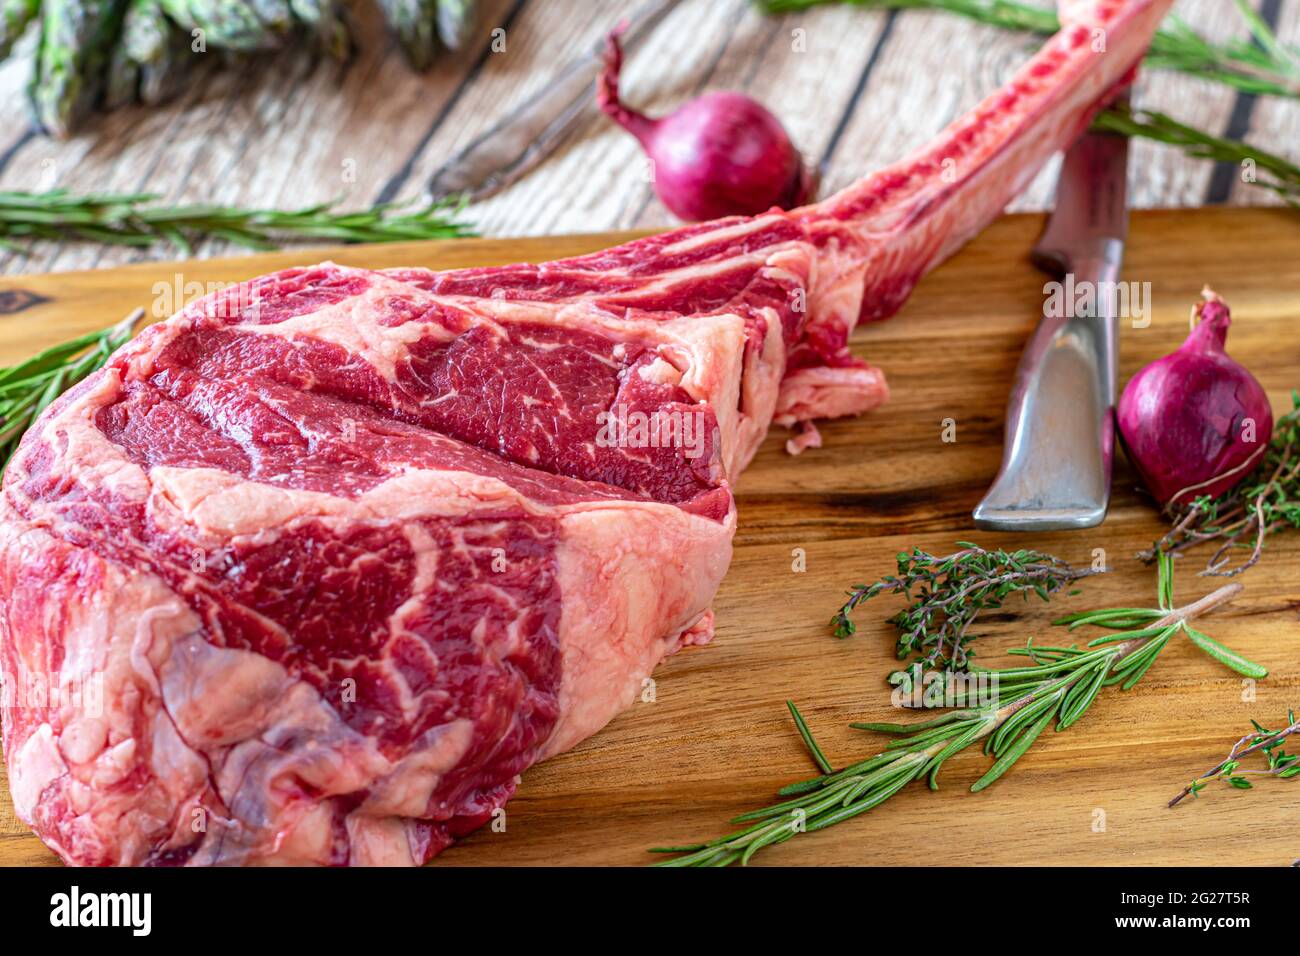 Irish tomahawk  rib eye steak on rustic wooden table background with knife and herbs Stock Photo